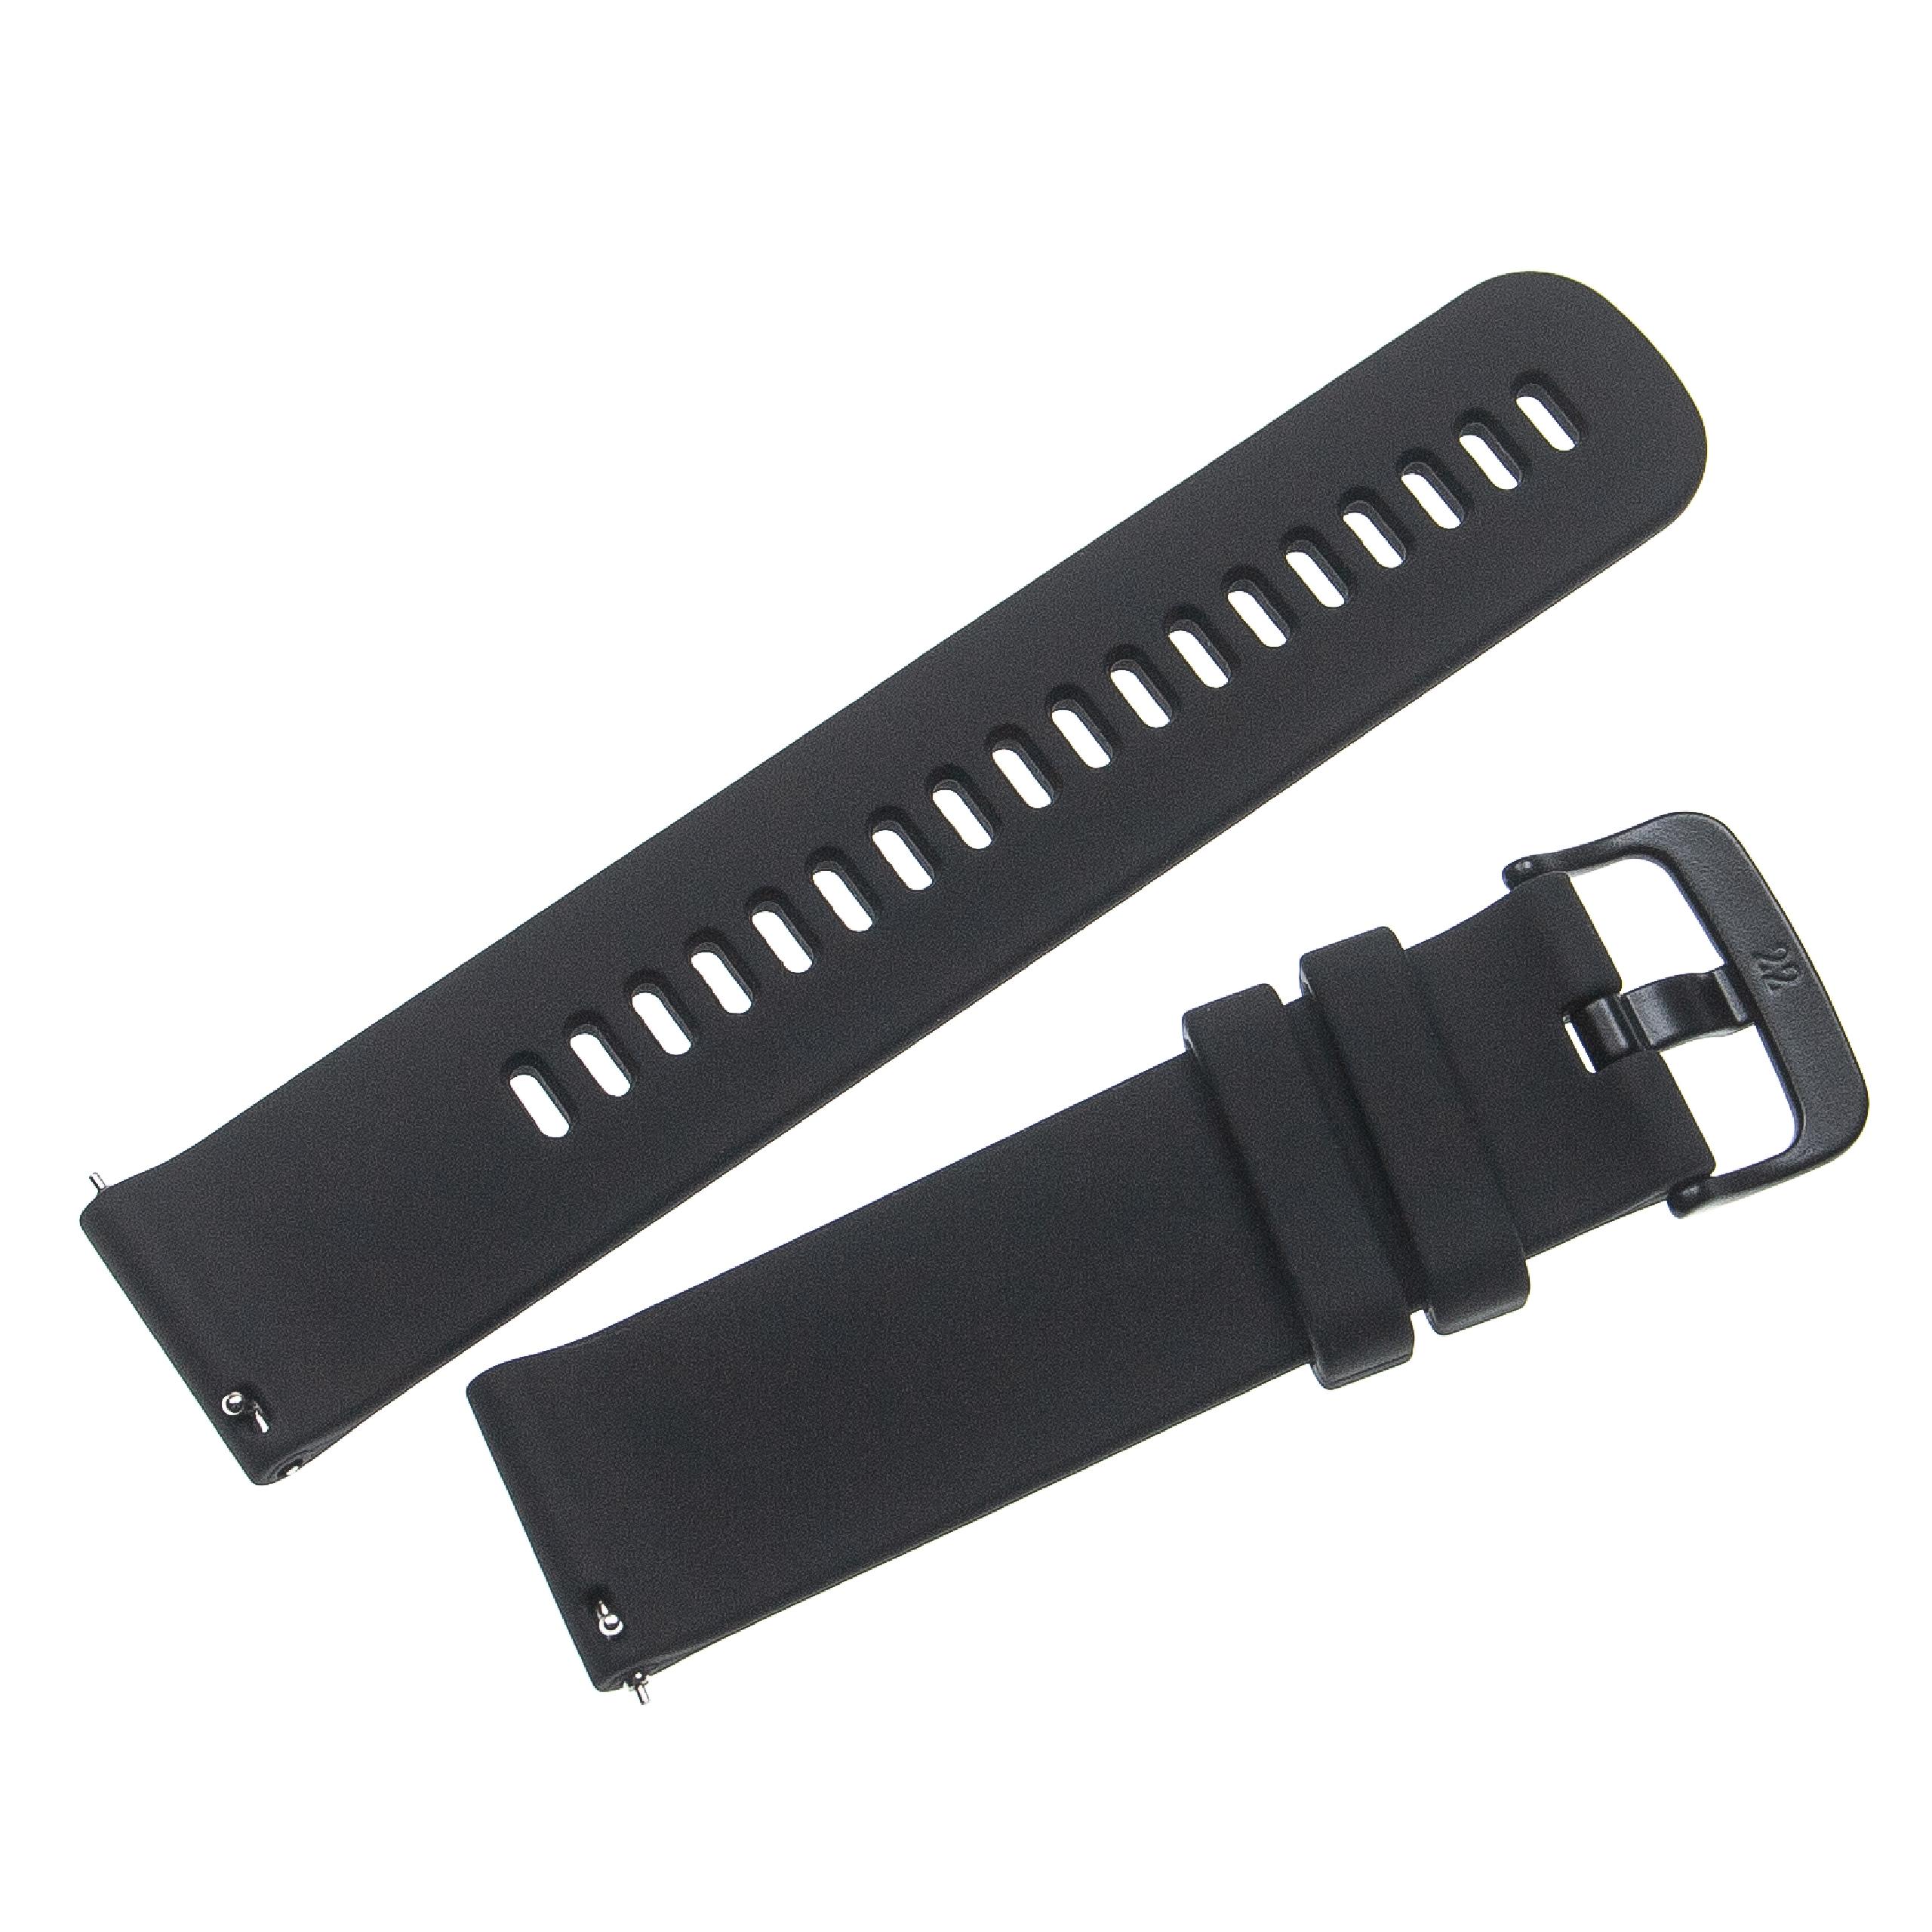 wristband for Garmin Forerunner Smartwatch - 12.1 + 9.2 cm long, 22mm wide, silicone, black